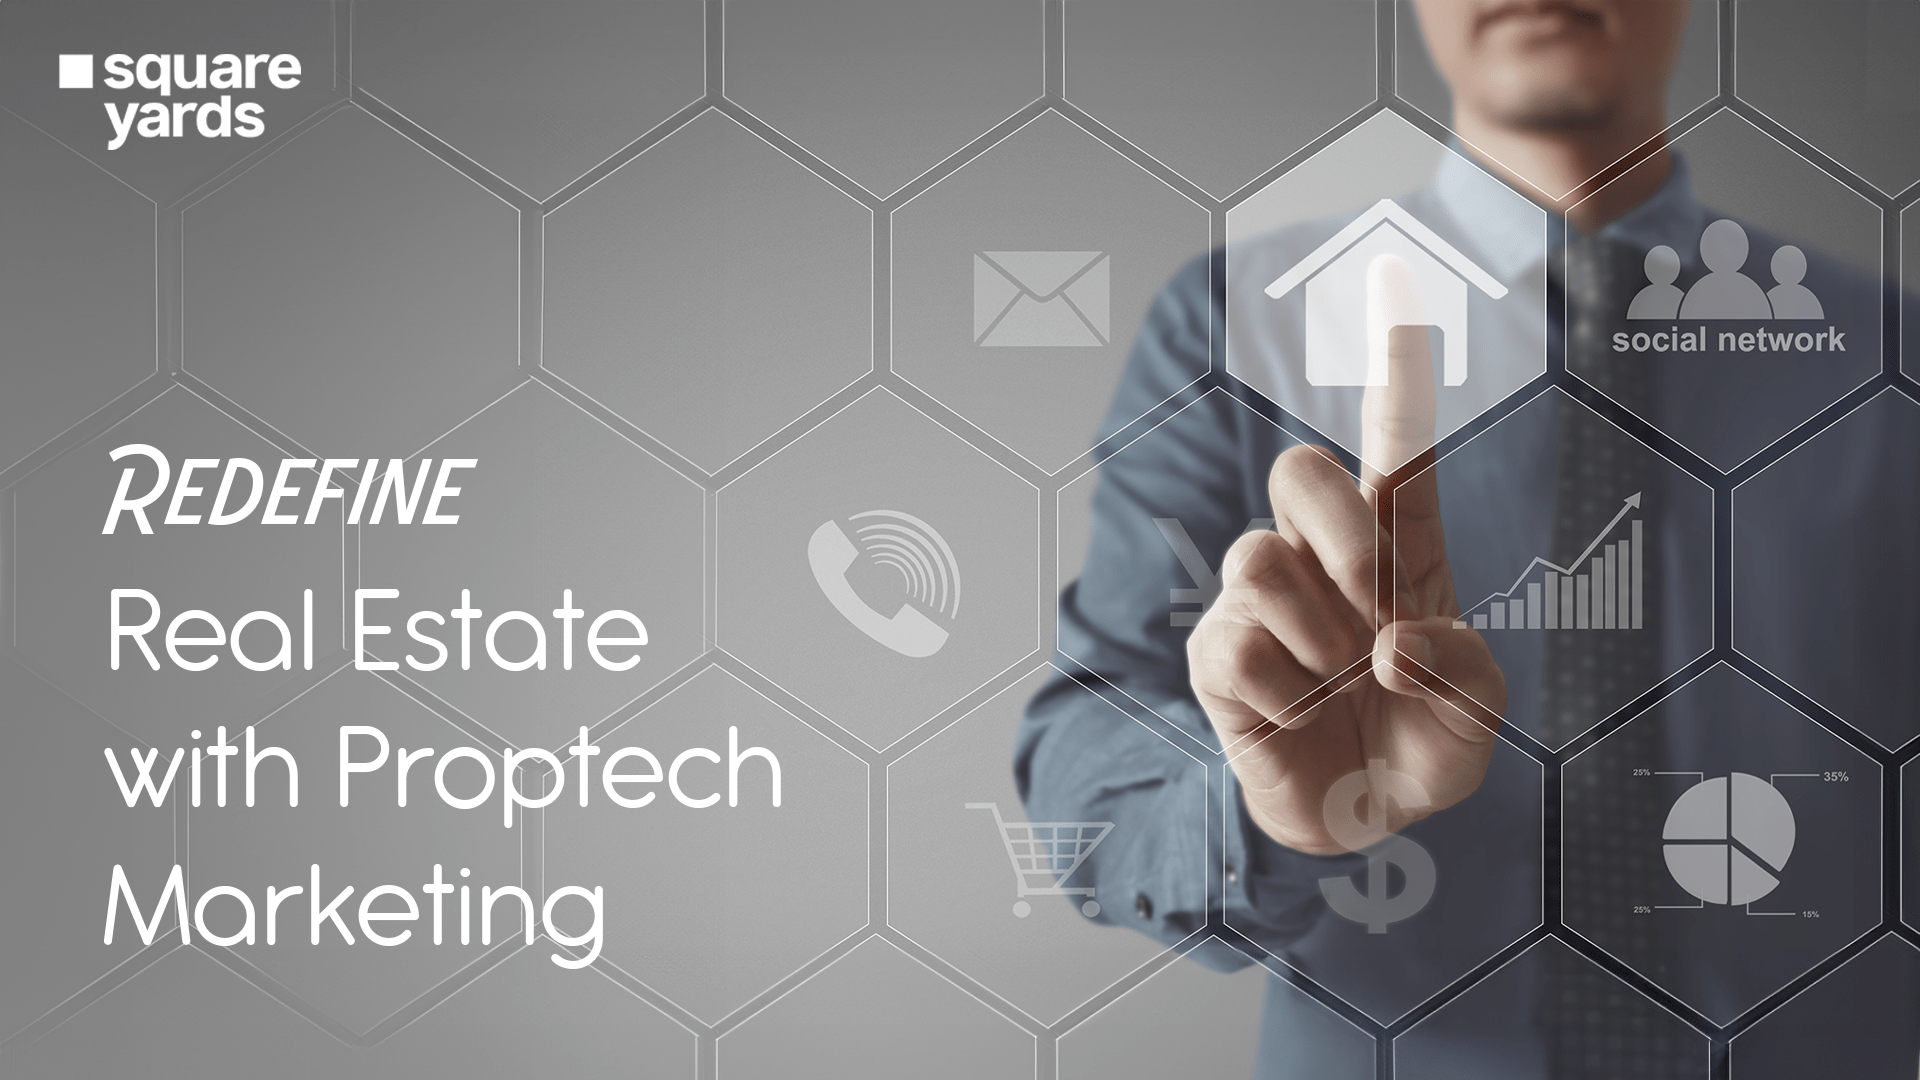 Redefine-Real-Estate-with-Proptech-Marketing